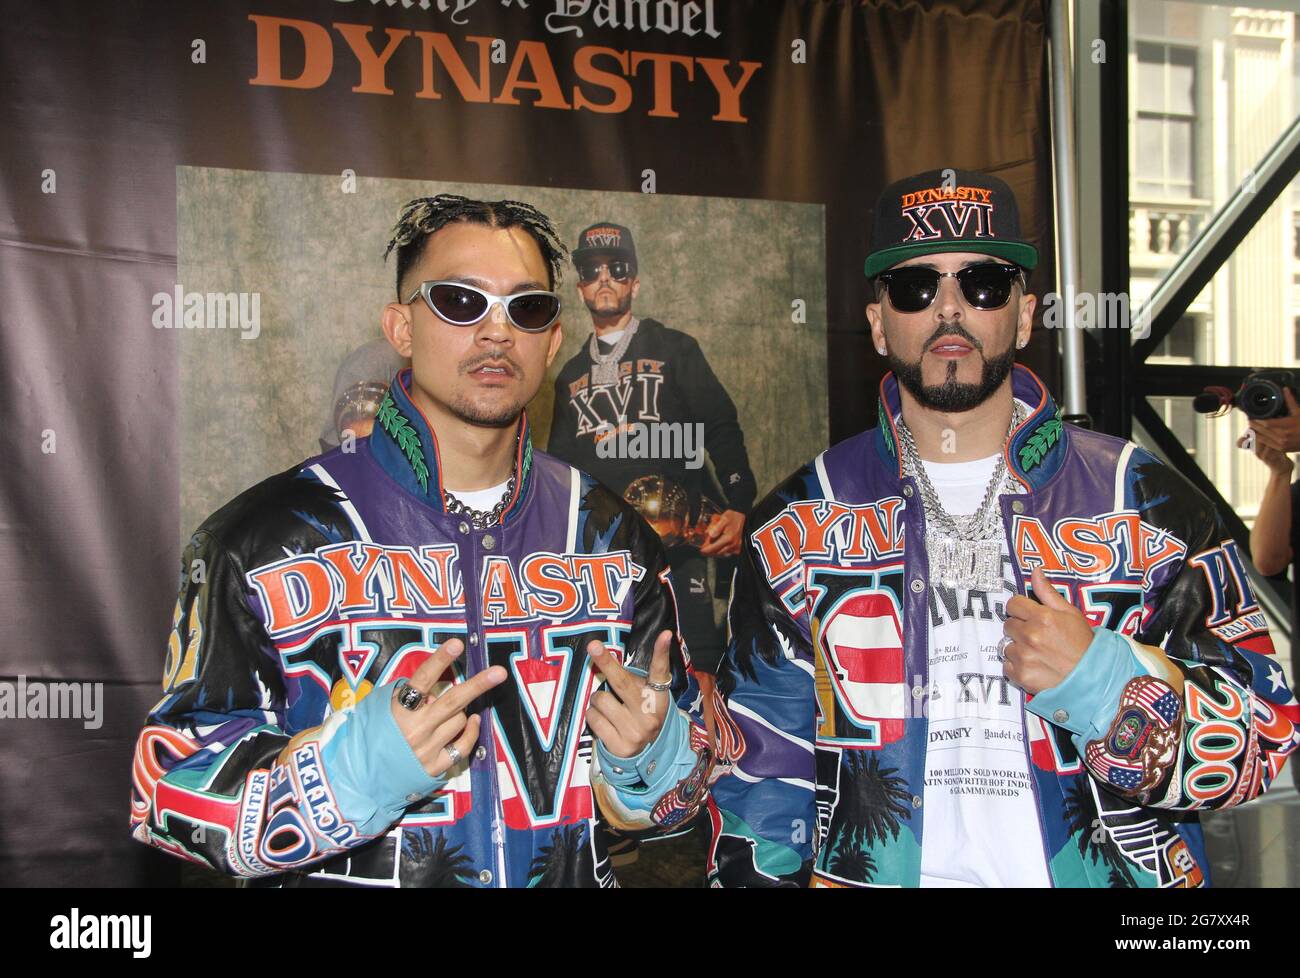 New York, NY, USA. 16th July, 2021. Tainy & Yandel press conference and meet and greet promoting the premiere of album 'Dynasty' at PUMA NYC Flagship Store in New York City on July 16, 2021. Credit: Erik Nielsen/Media Punch/Alamy Live News Stock Photo